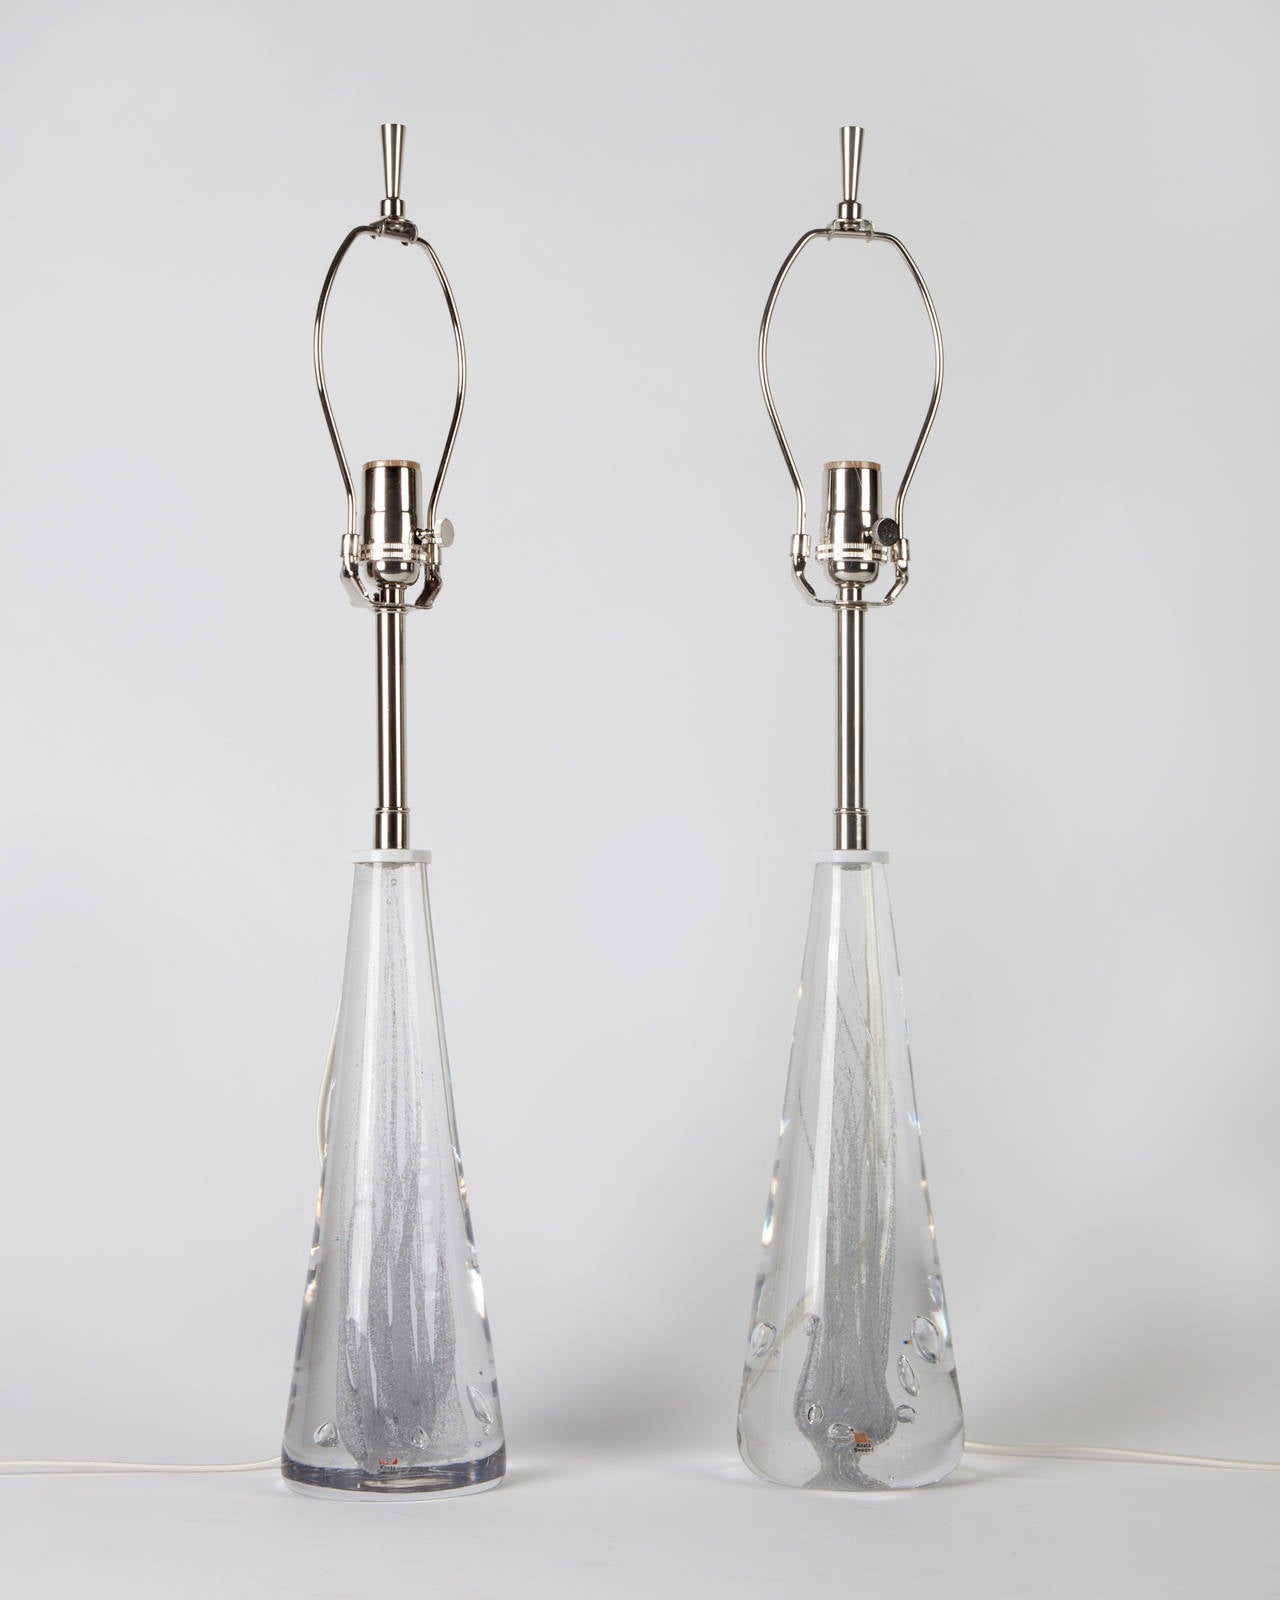 ATL1887

A pair of solid glass lamps having centers of swirled air bubbles. Topped with nickel fittings. Signed by Vicke Lindstrand for the Swedish maker Kosta. Due to the antique nature of this fixture, there may be some nicks or imperfections in